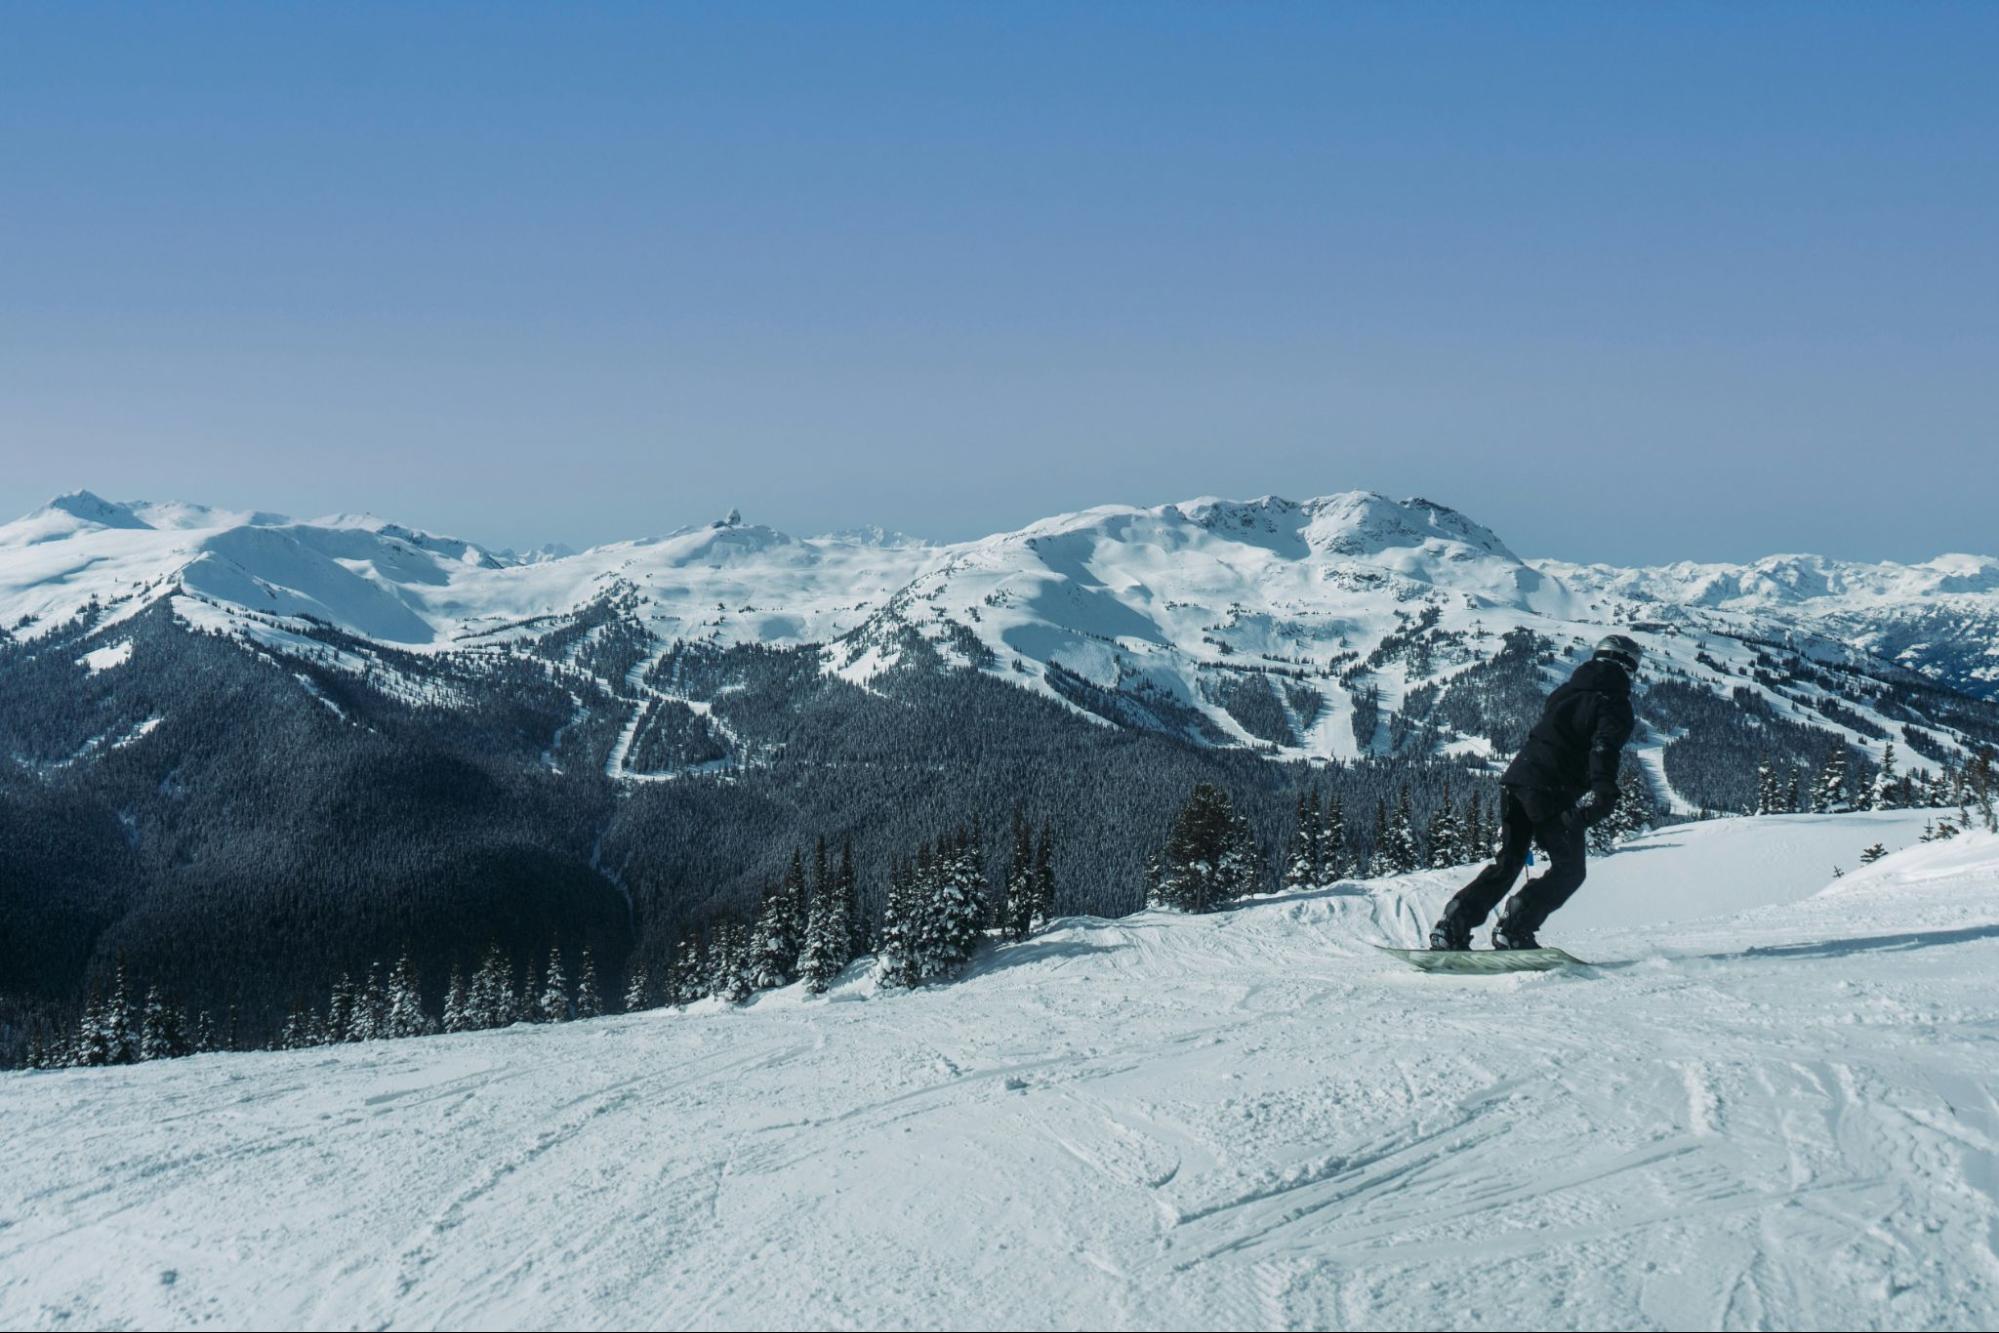 A skier on a slope in British Columbia, Canada.